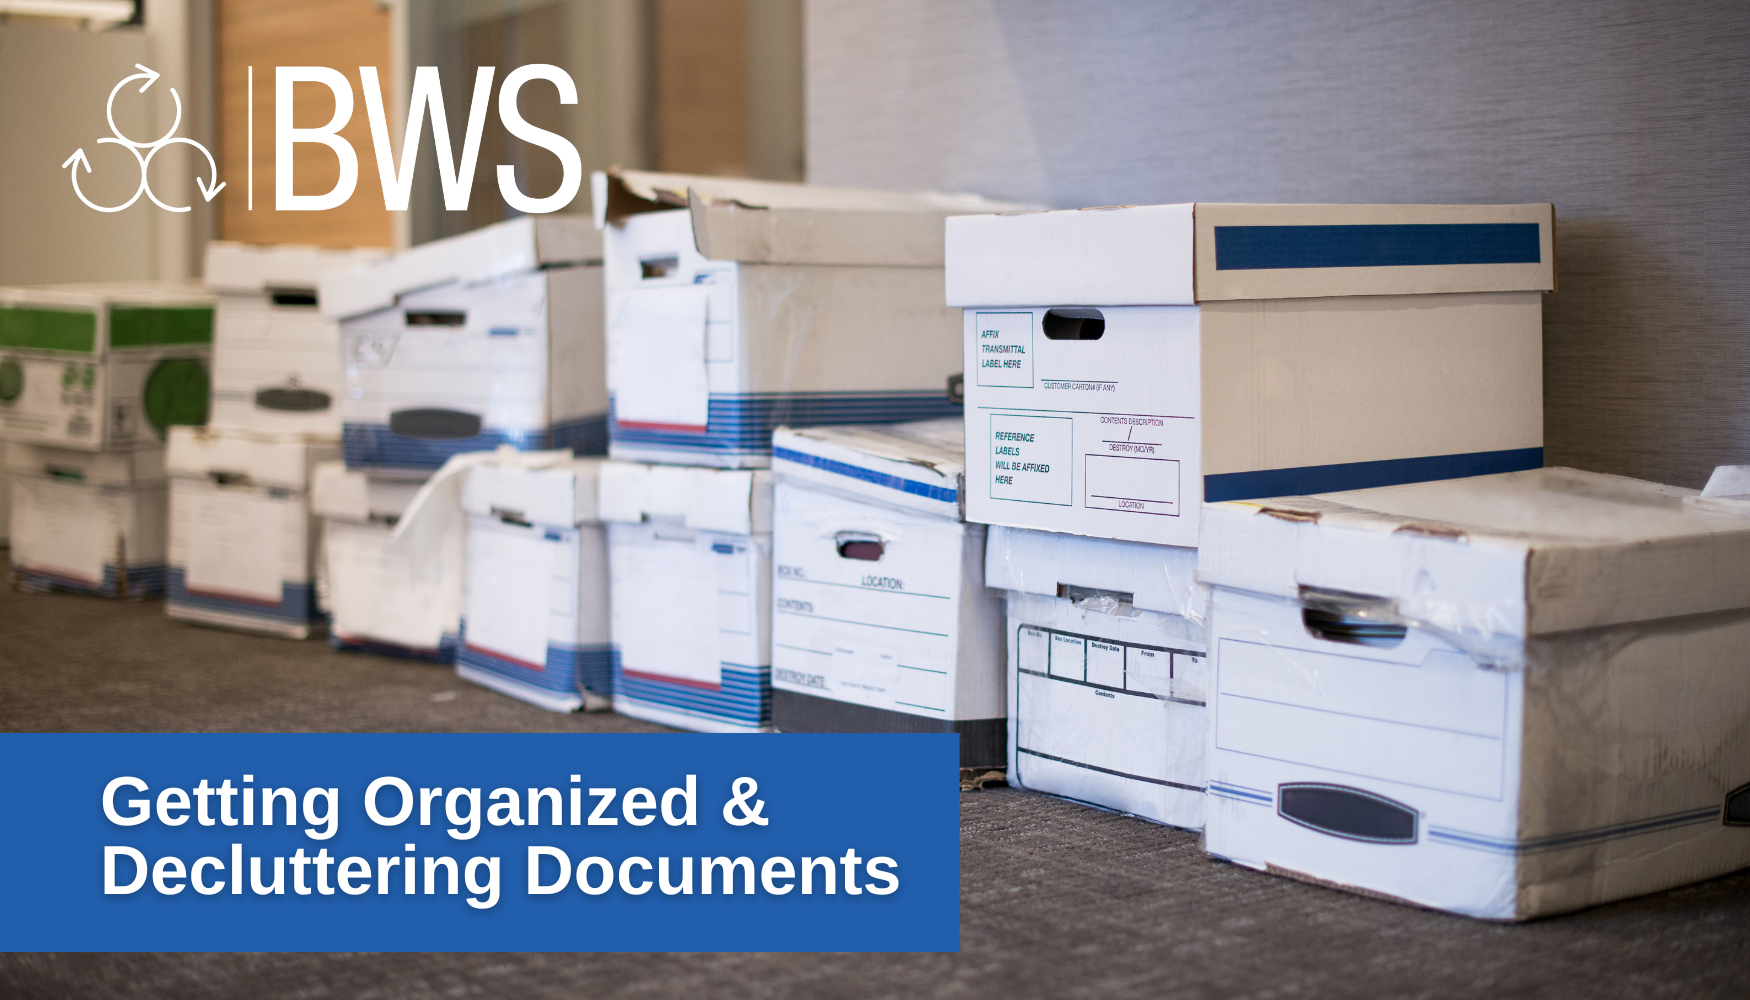 BWS Getting Organized and Decluttering Documents